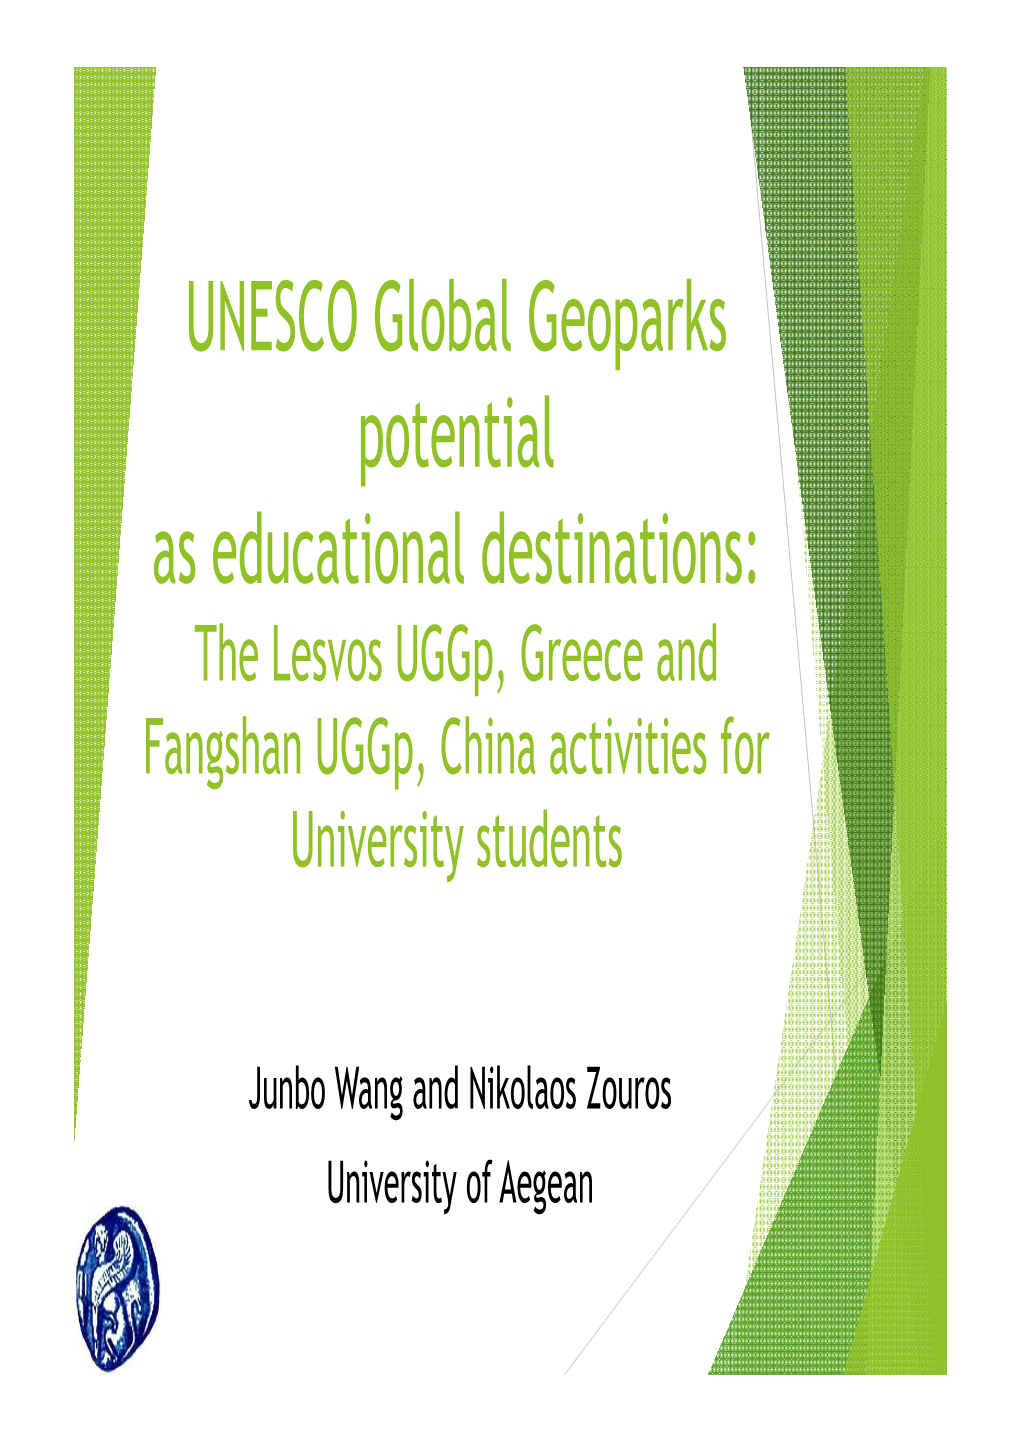 UNESCO Global Geoparks Potential As Educational Destinations: the Lesvos Uggp, Greece and Fangshan Uggp, China Activities for University Students